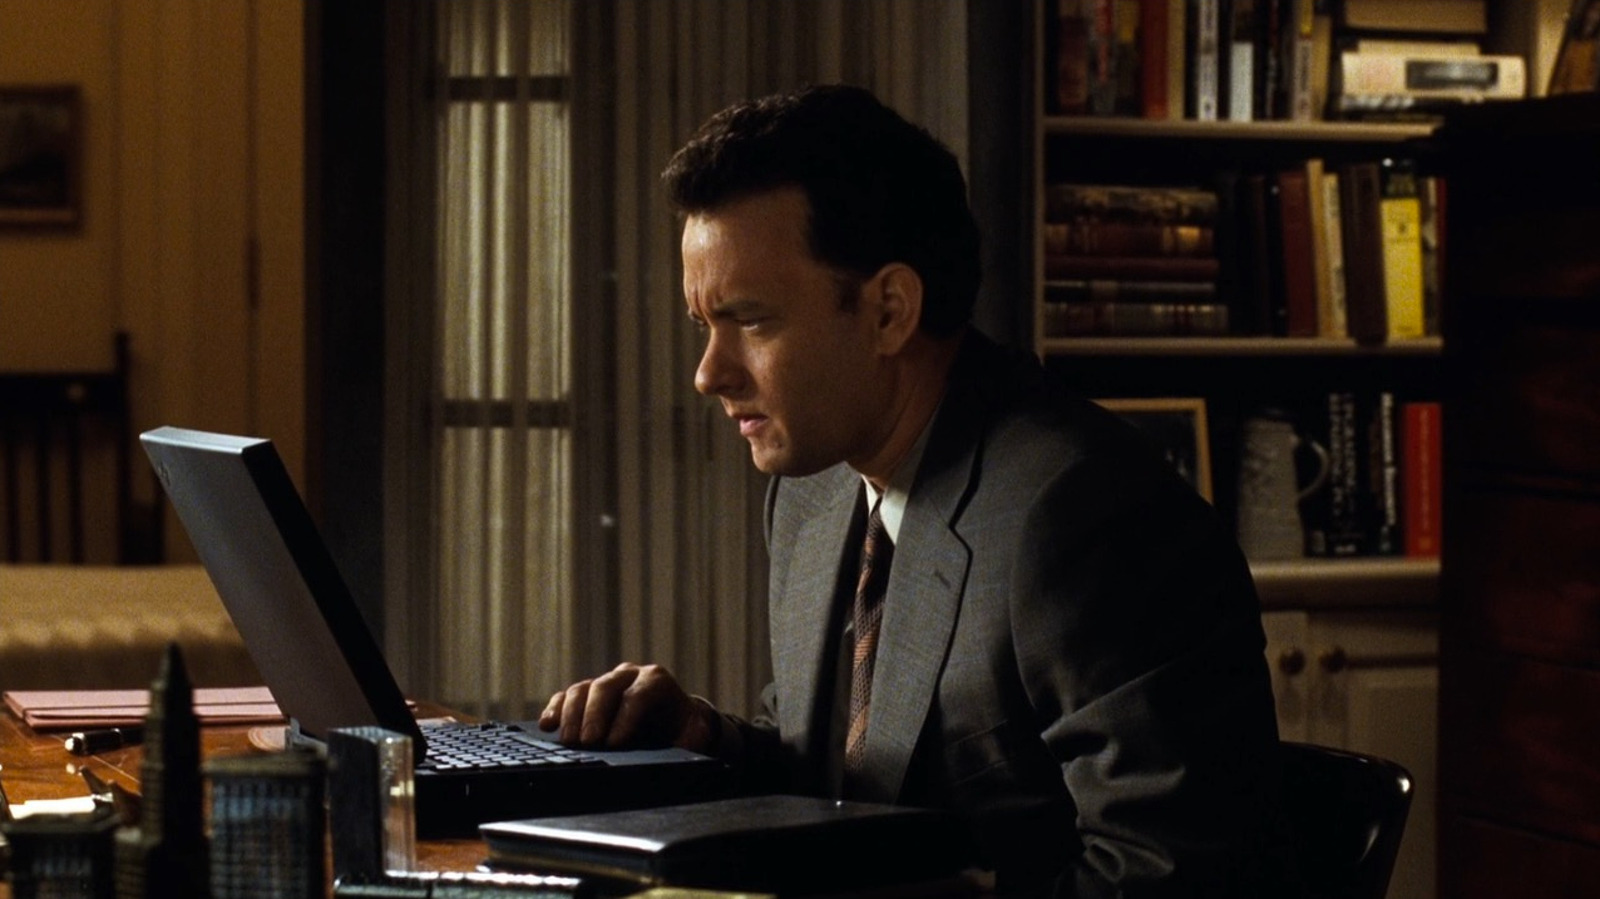 Why You've Got Mail Is Dated In The Most Fun Way Possible